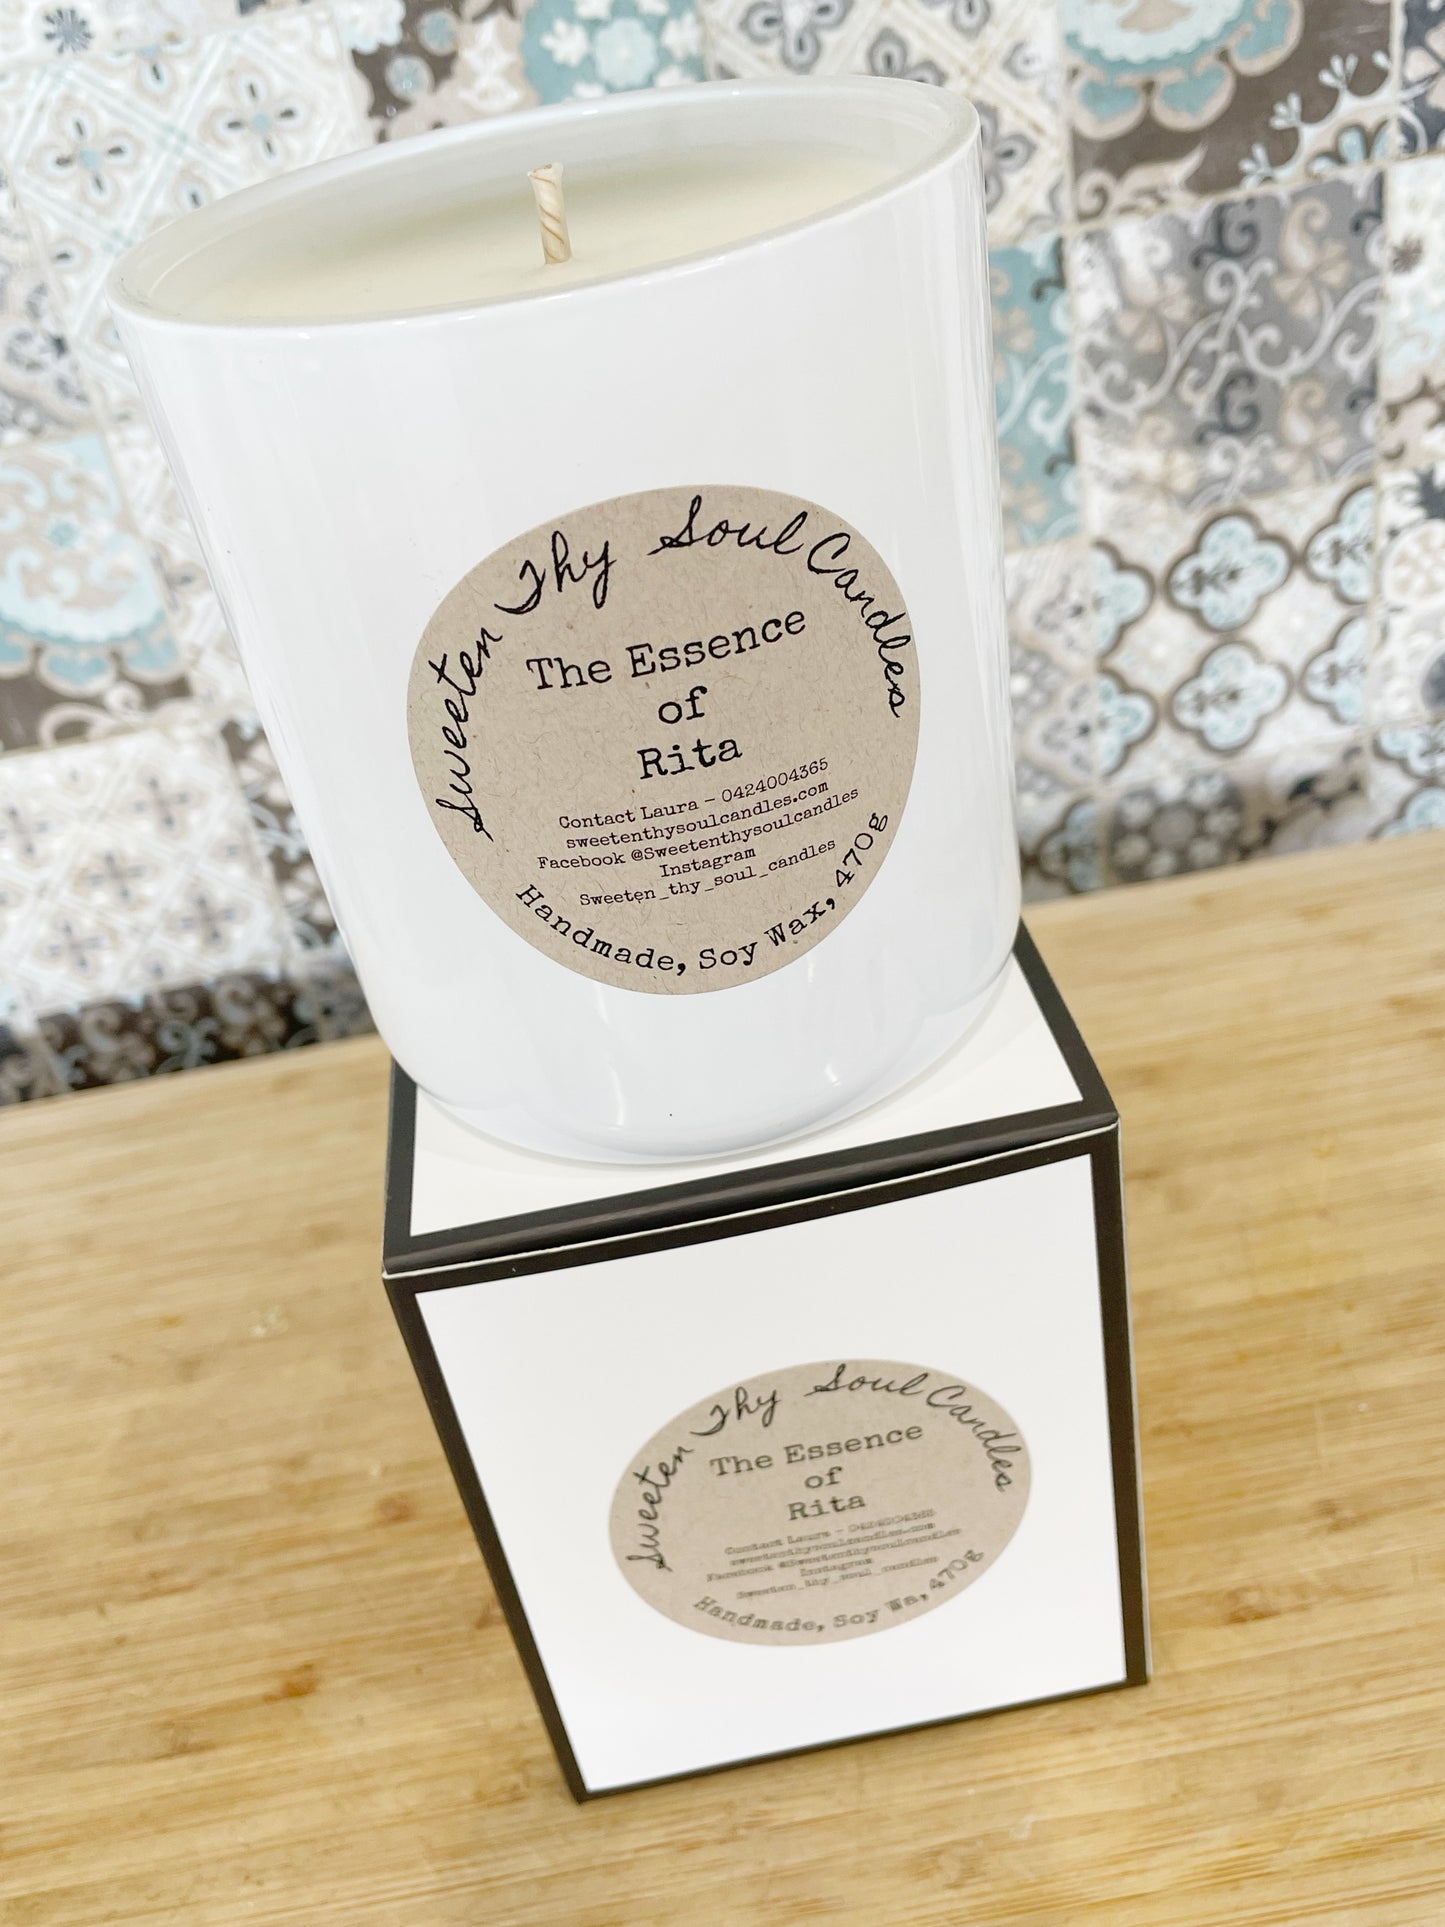 Coconut and Lime 470g soy candle